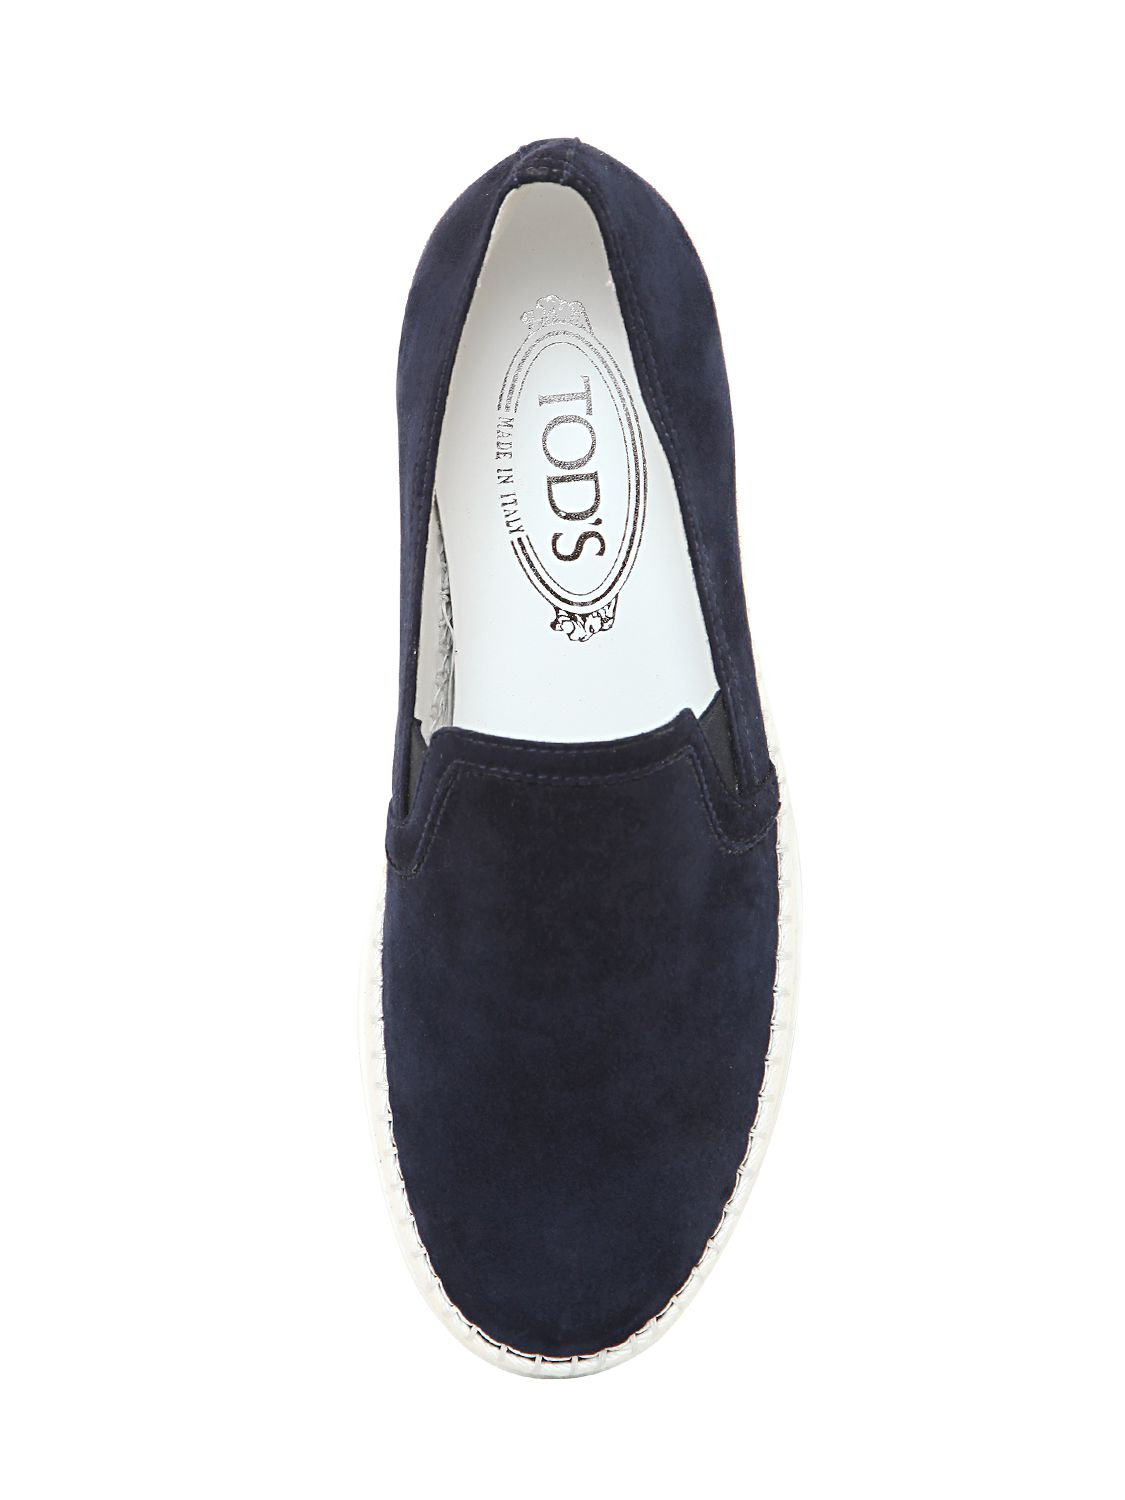 Lyst - Tod'S Suede Slip On Sneakers in Blue for Men